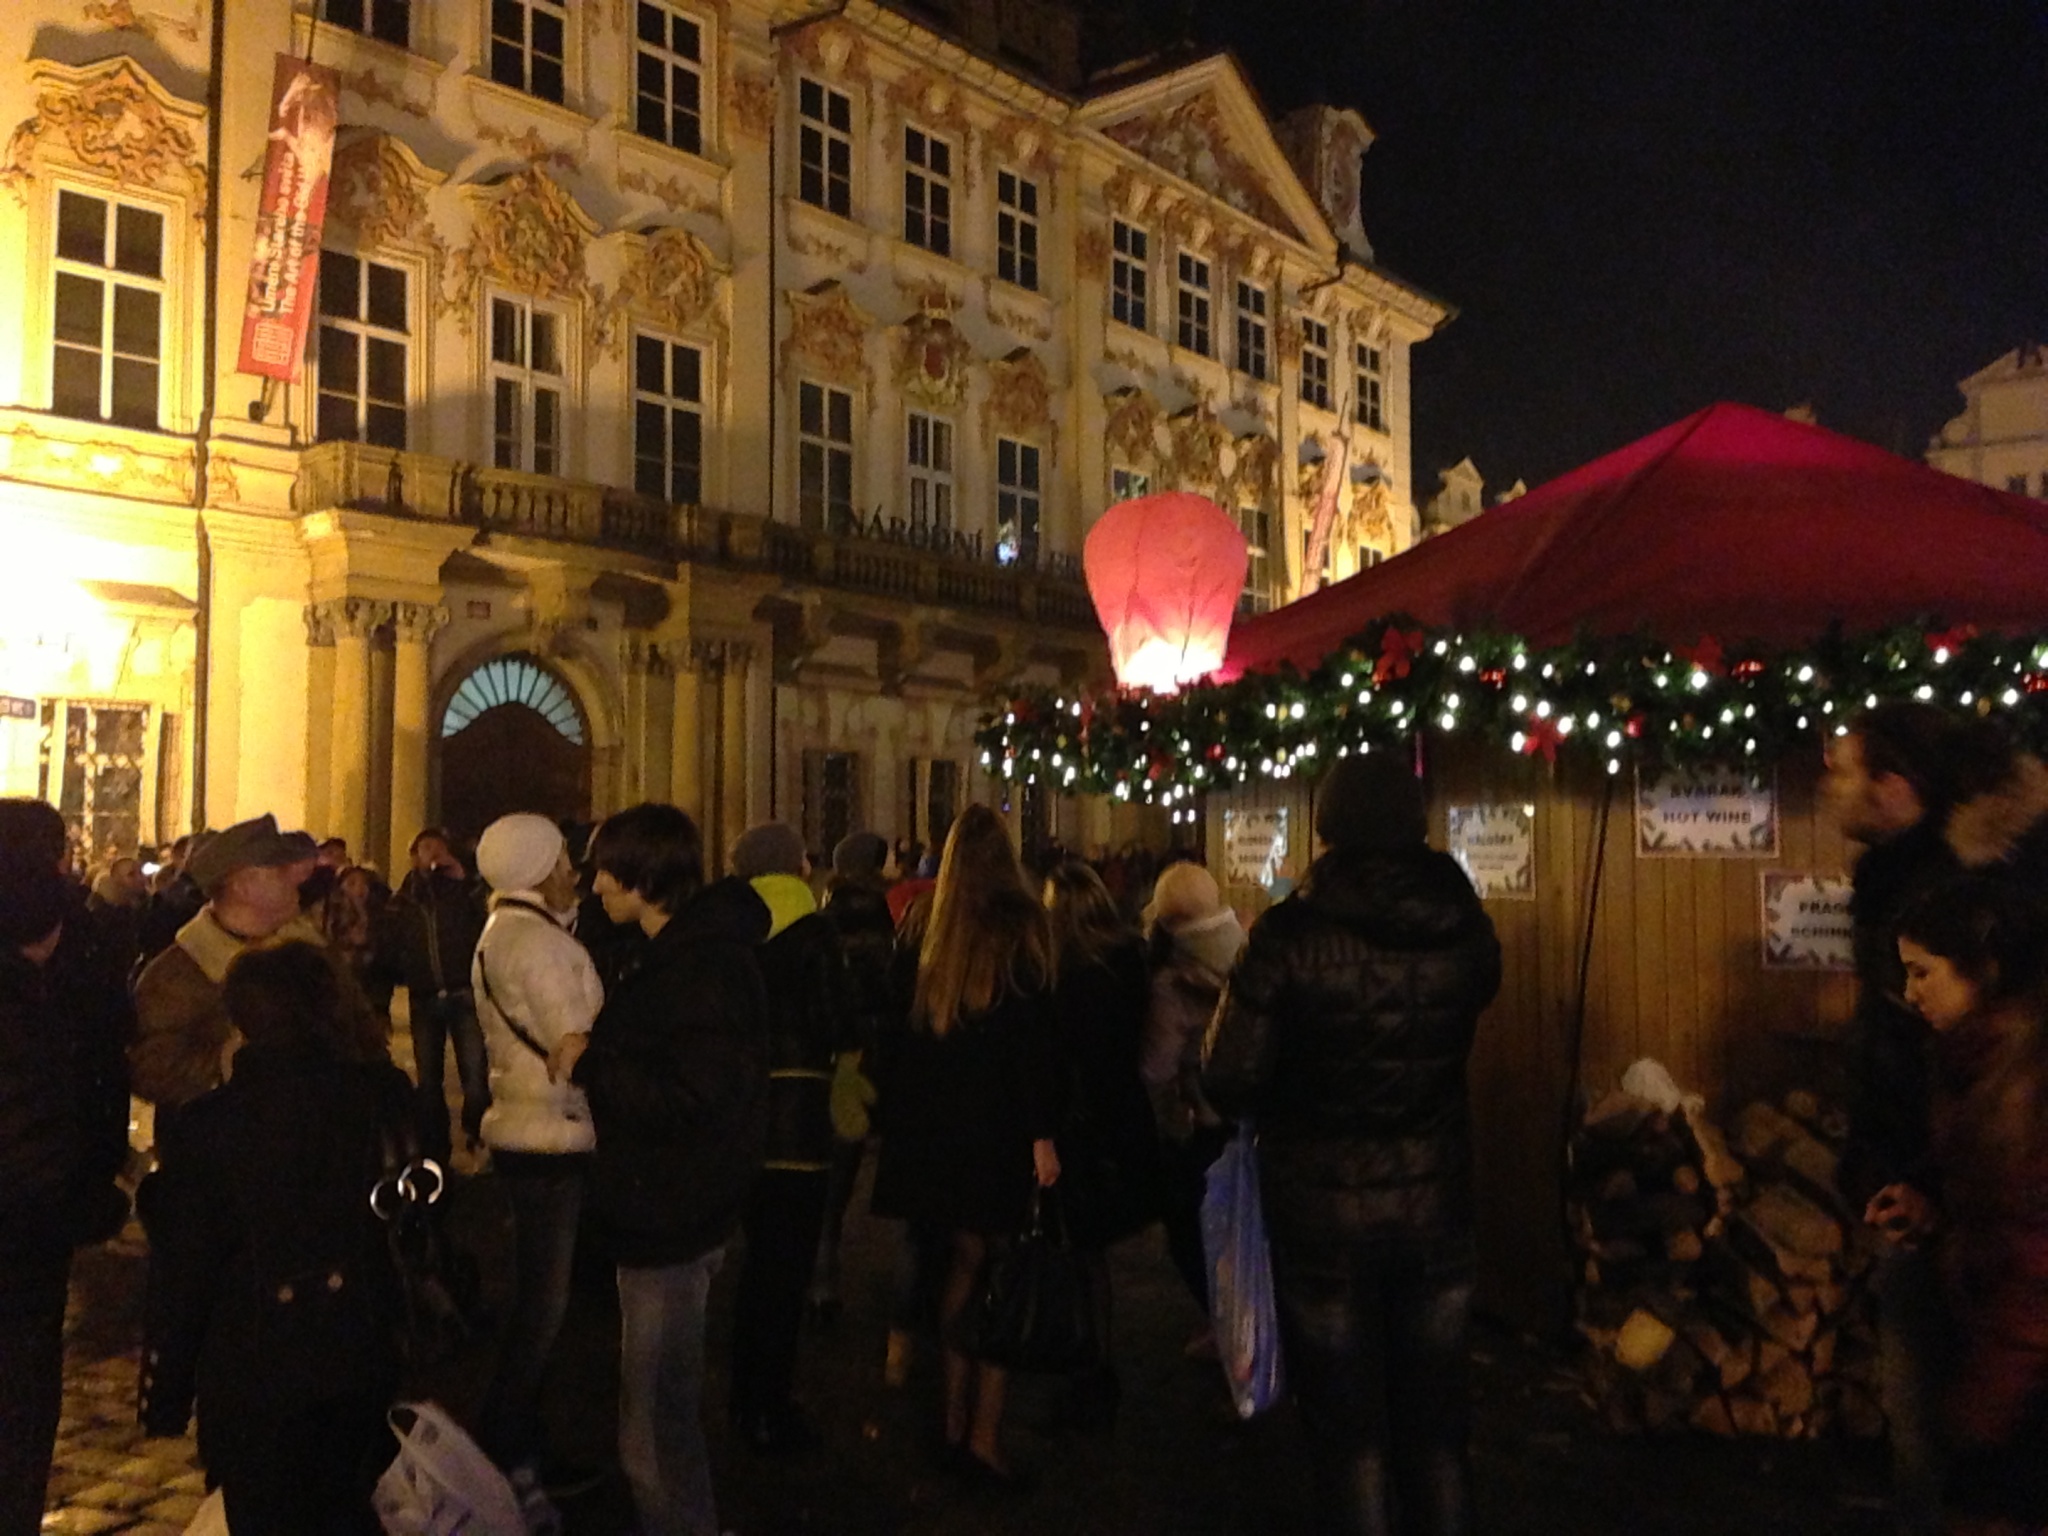 A lit Chinese skylantern settles onto a vendor's booth's awning in Prague's Old Town Square.